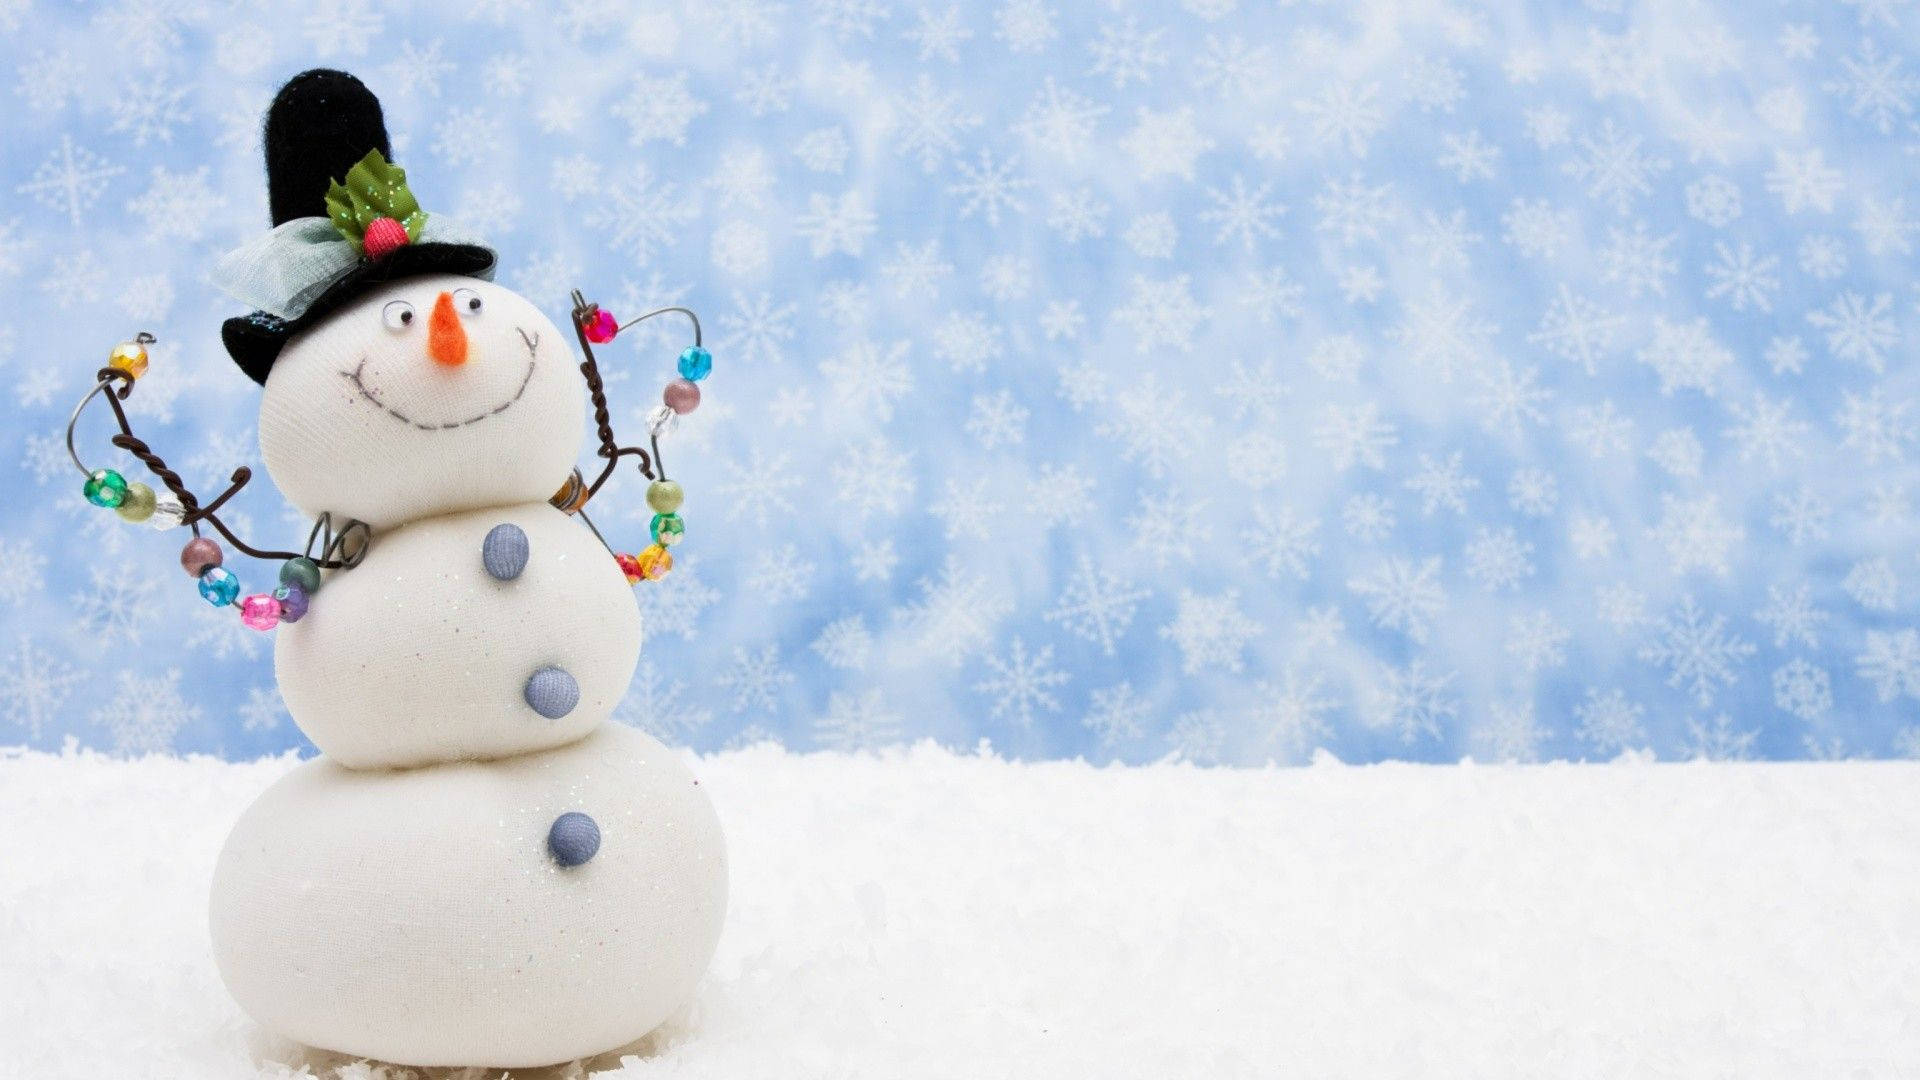 Snowman With Beads Background